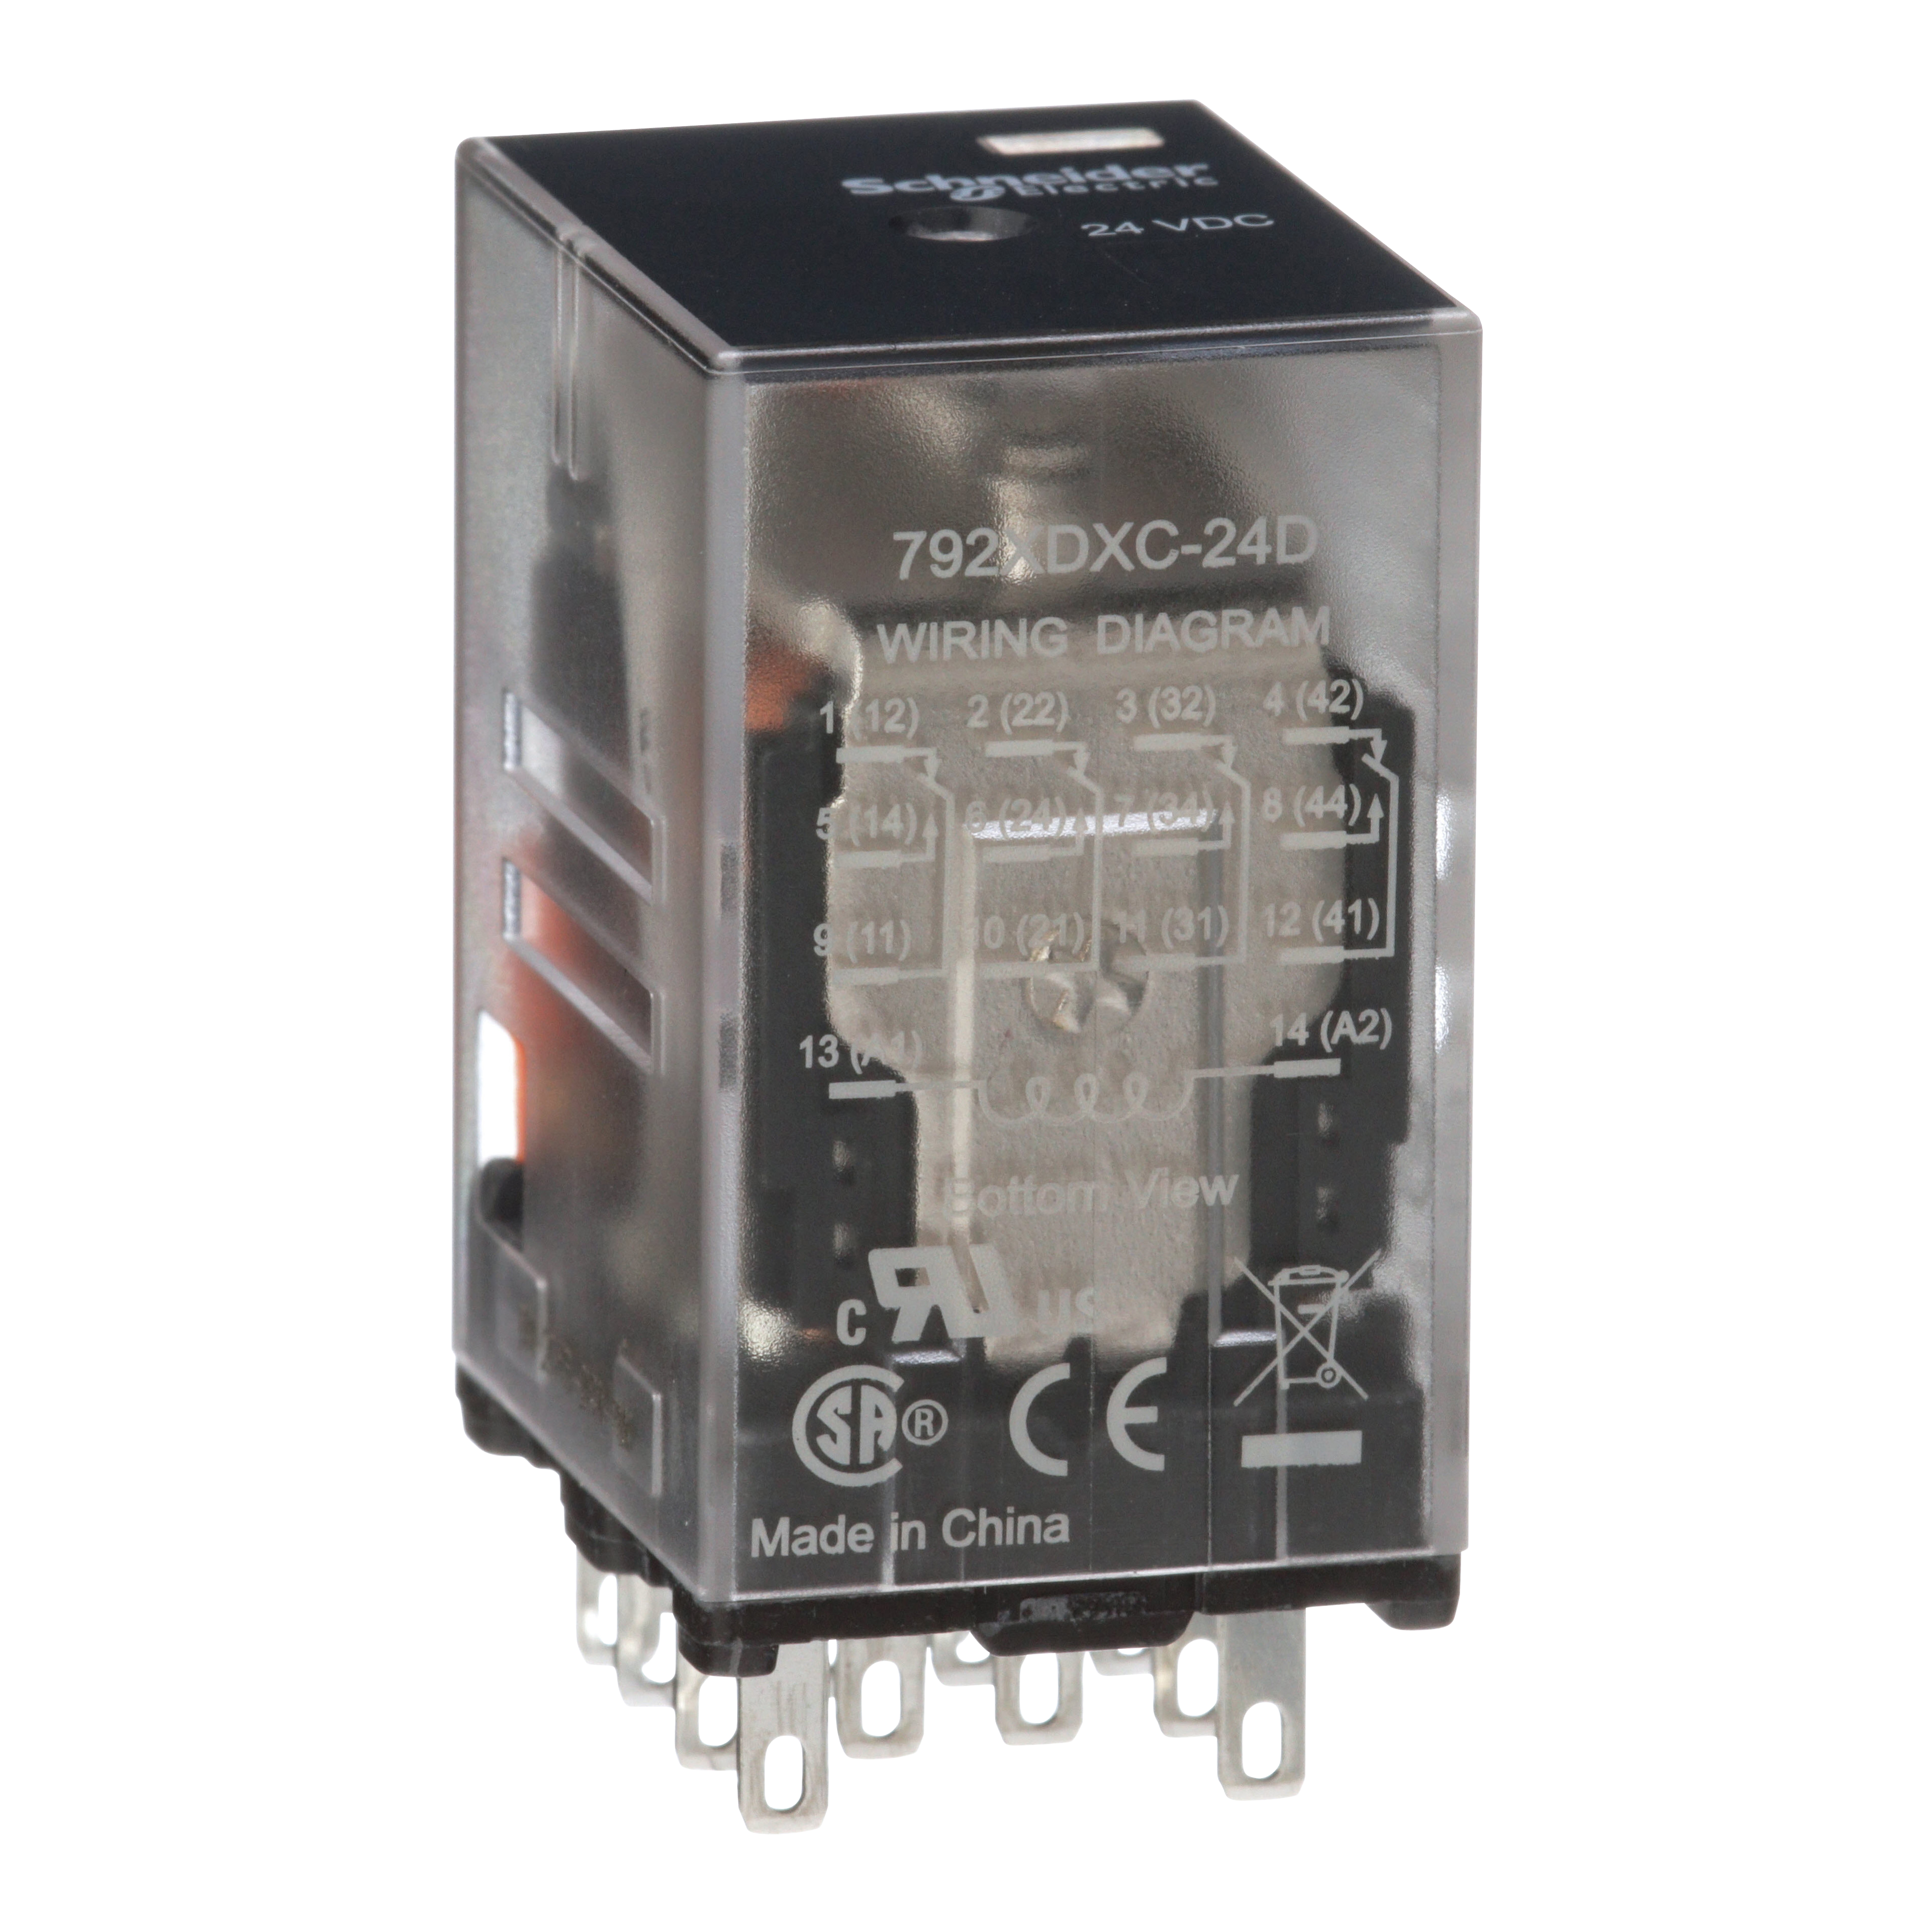 Power relay, SE Relays, 4PDT, 6A, 24 VDC, clear cover